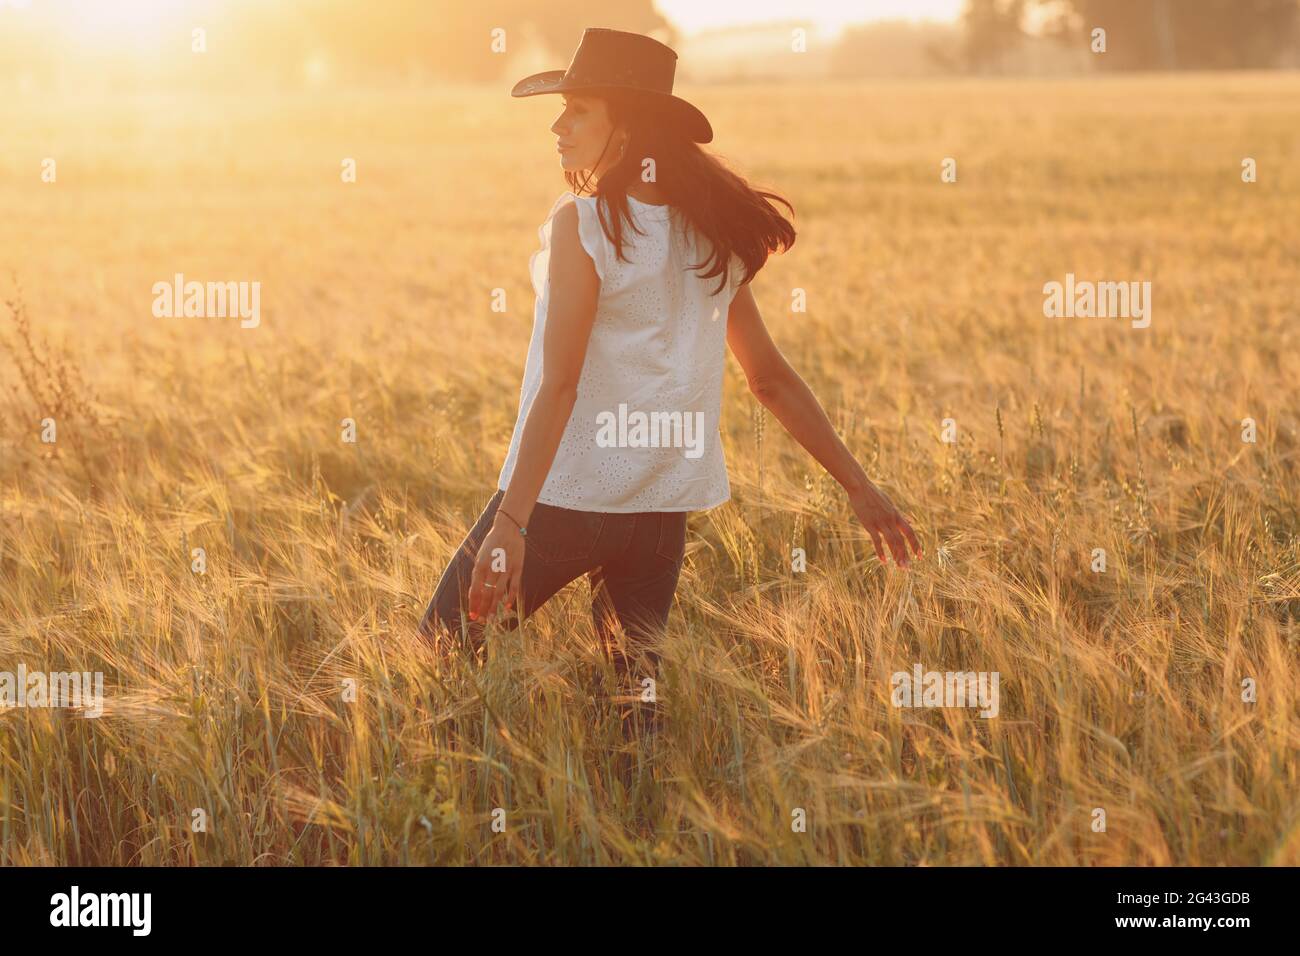 Woman farmer in cowboy hat walking with hands on ears at agricultural field on sunset Stock Photo